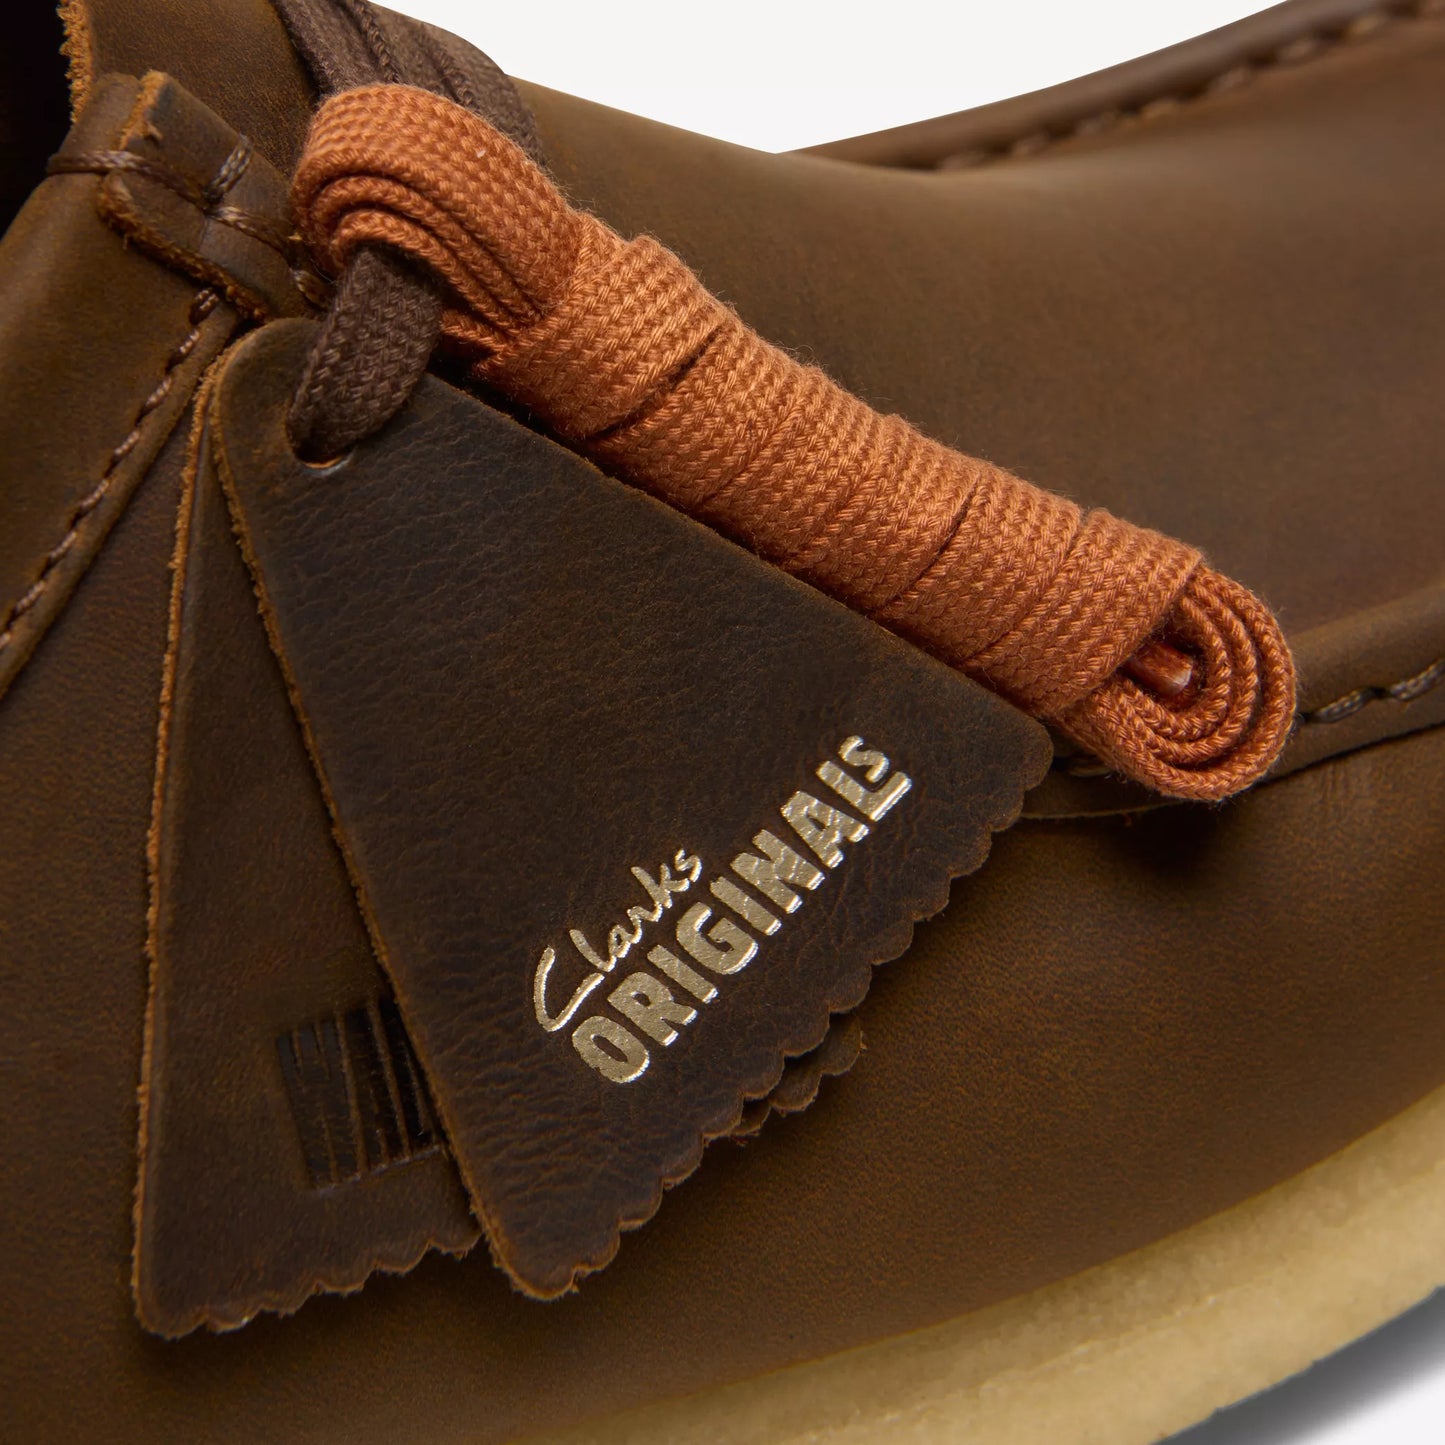 CLARKS Wallabee Shoe Suede Beeswax - Image 7